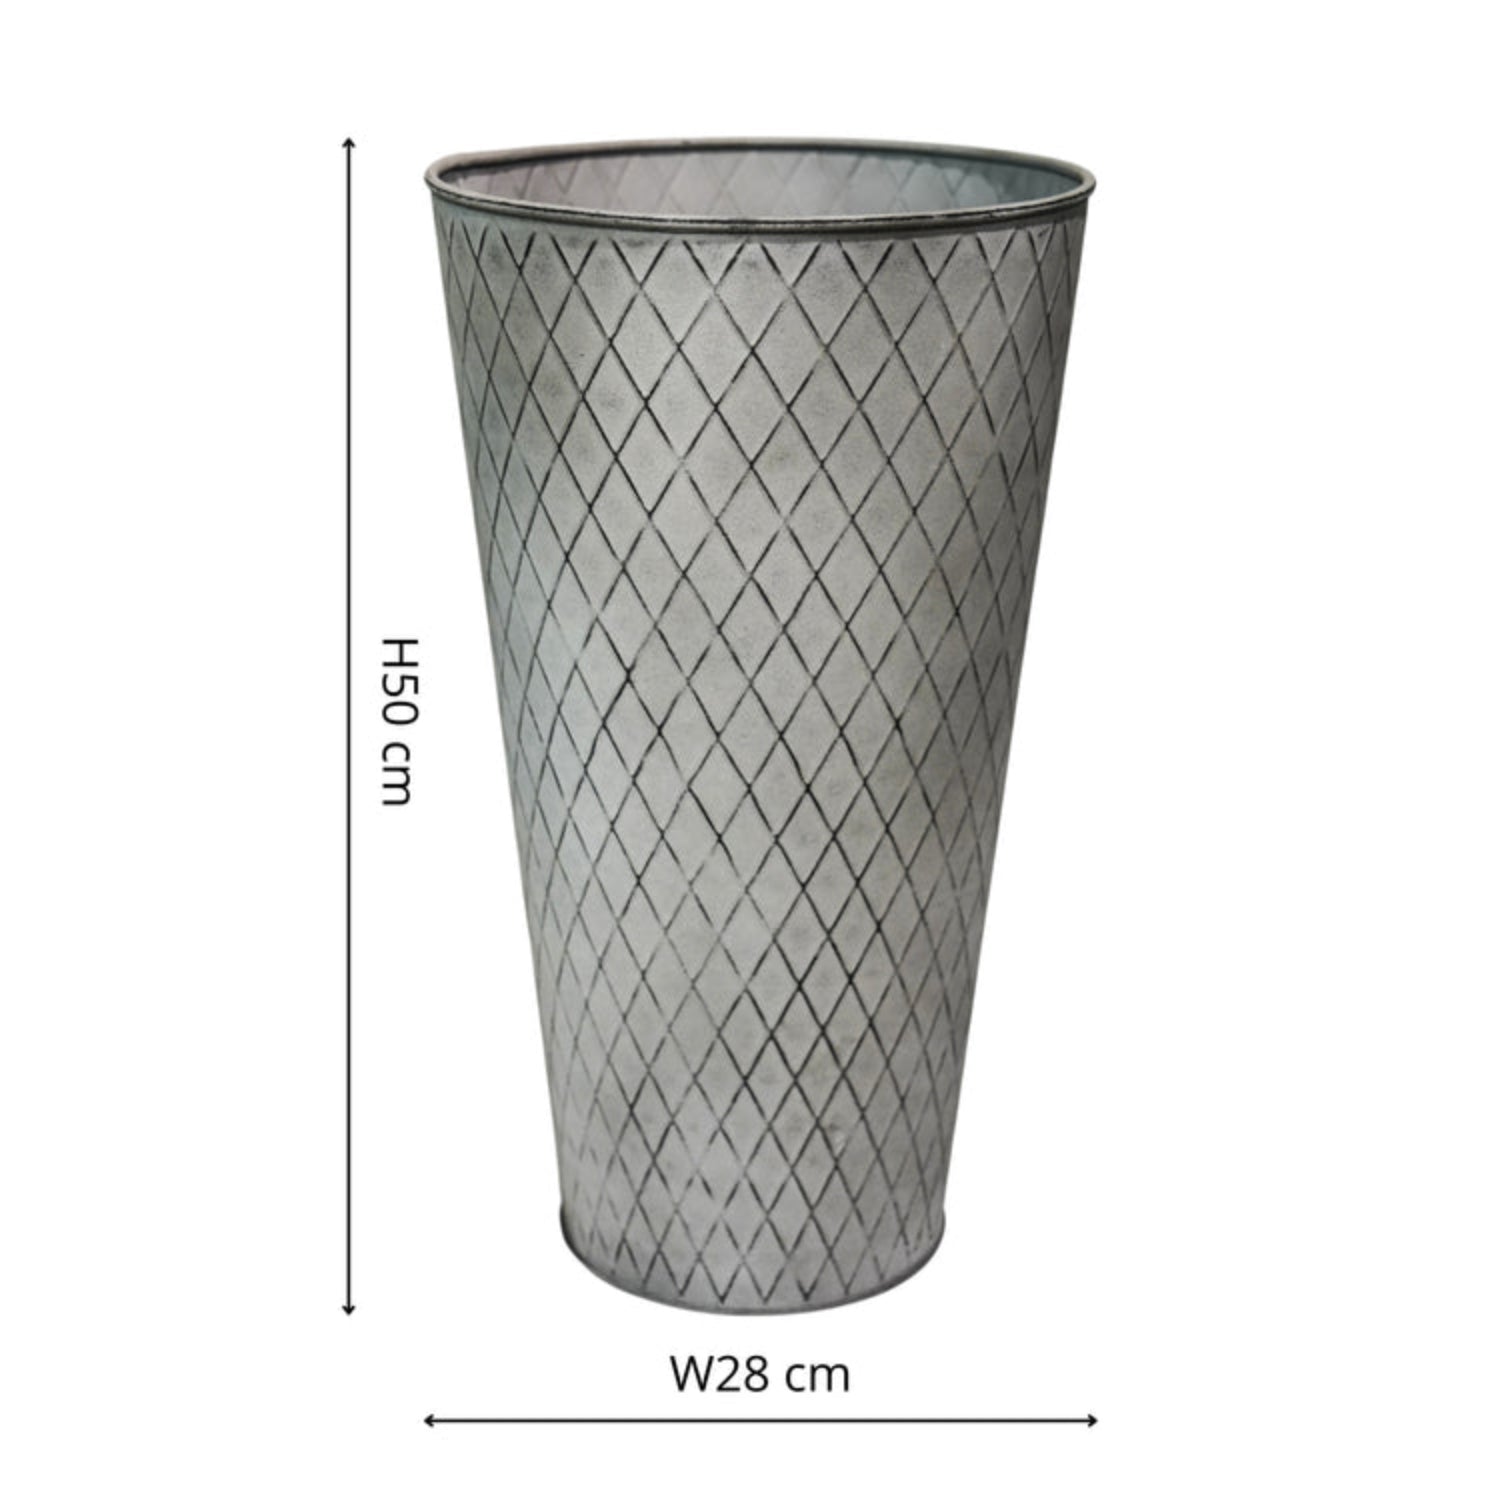 Country-Style Outdoor Chatsworth Zinc Vase